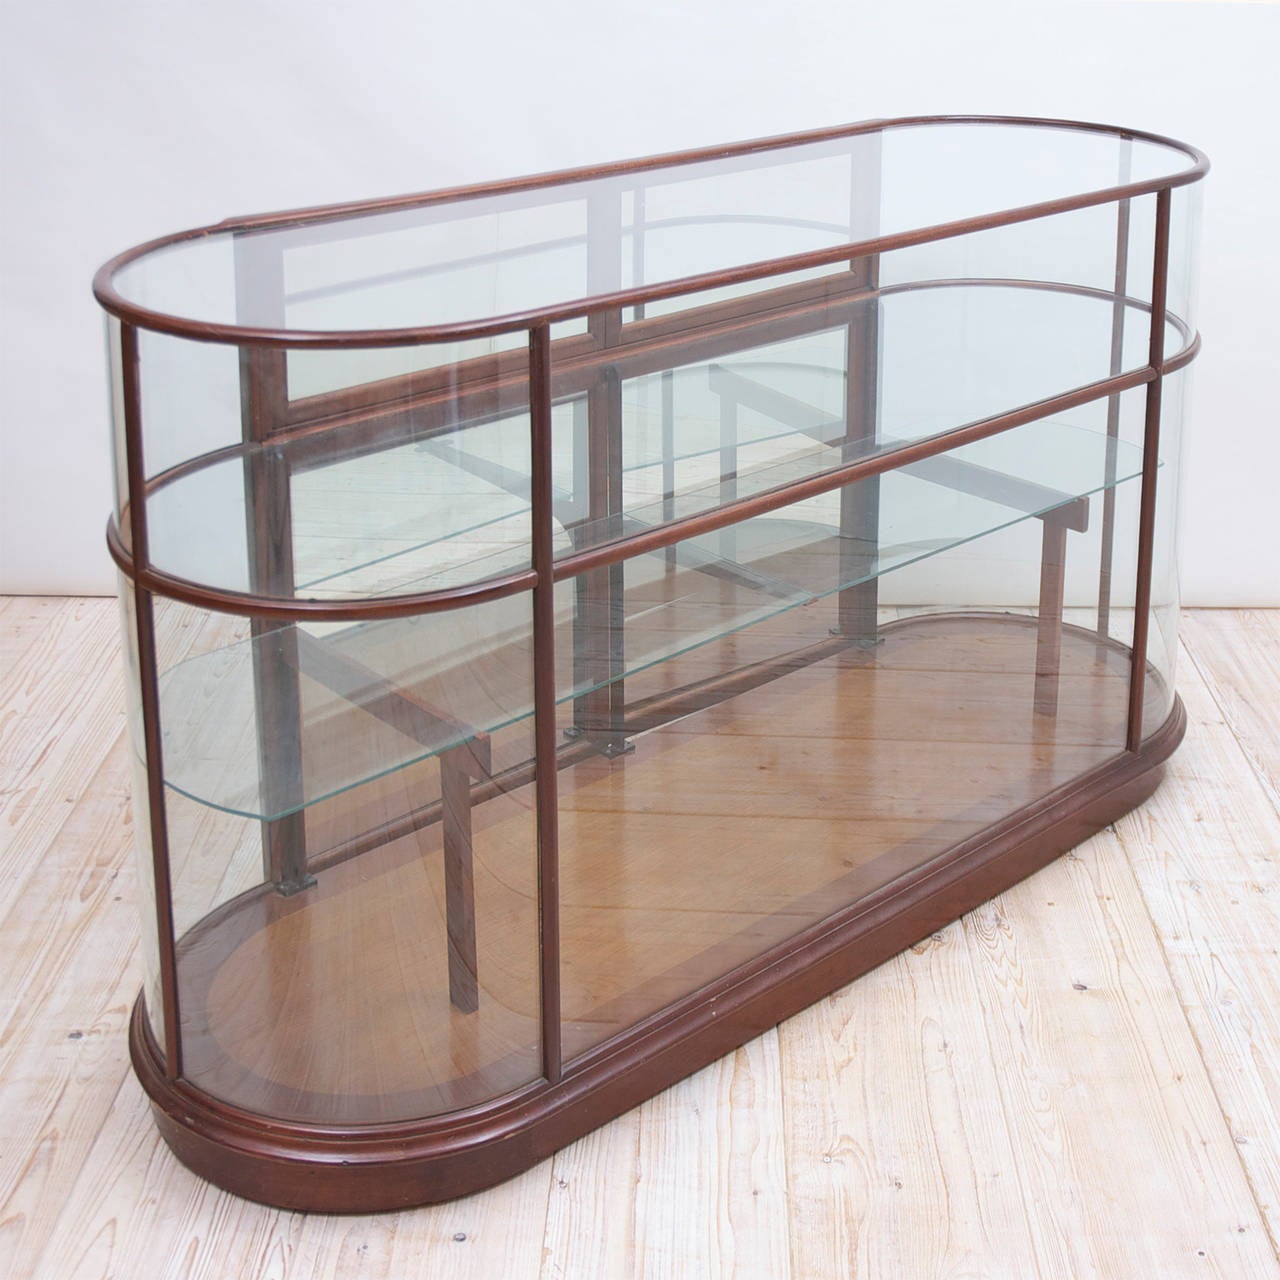 A store display counter with racetrack form. Mahogany framework with shaped glass and glass shelves. Interior mirrors on back doors to create the illusion of being all glass, American, circa 1950. A lovely piece to display lingerie, lace, clothing